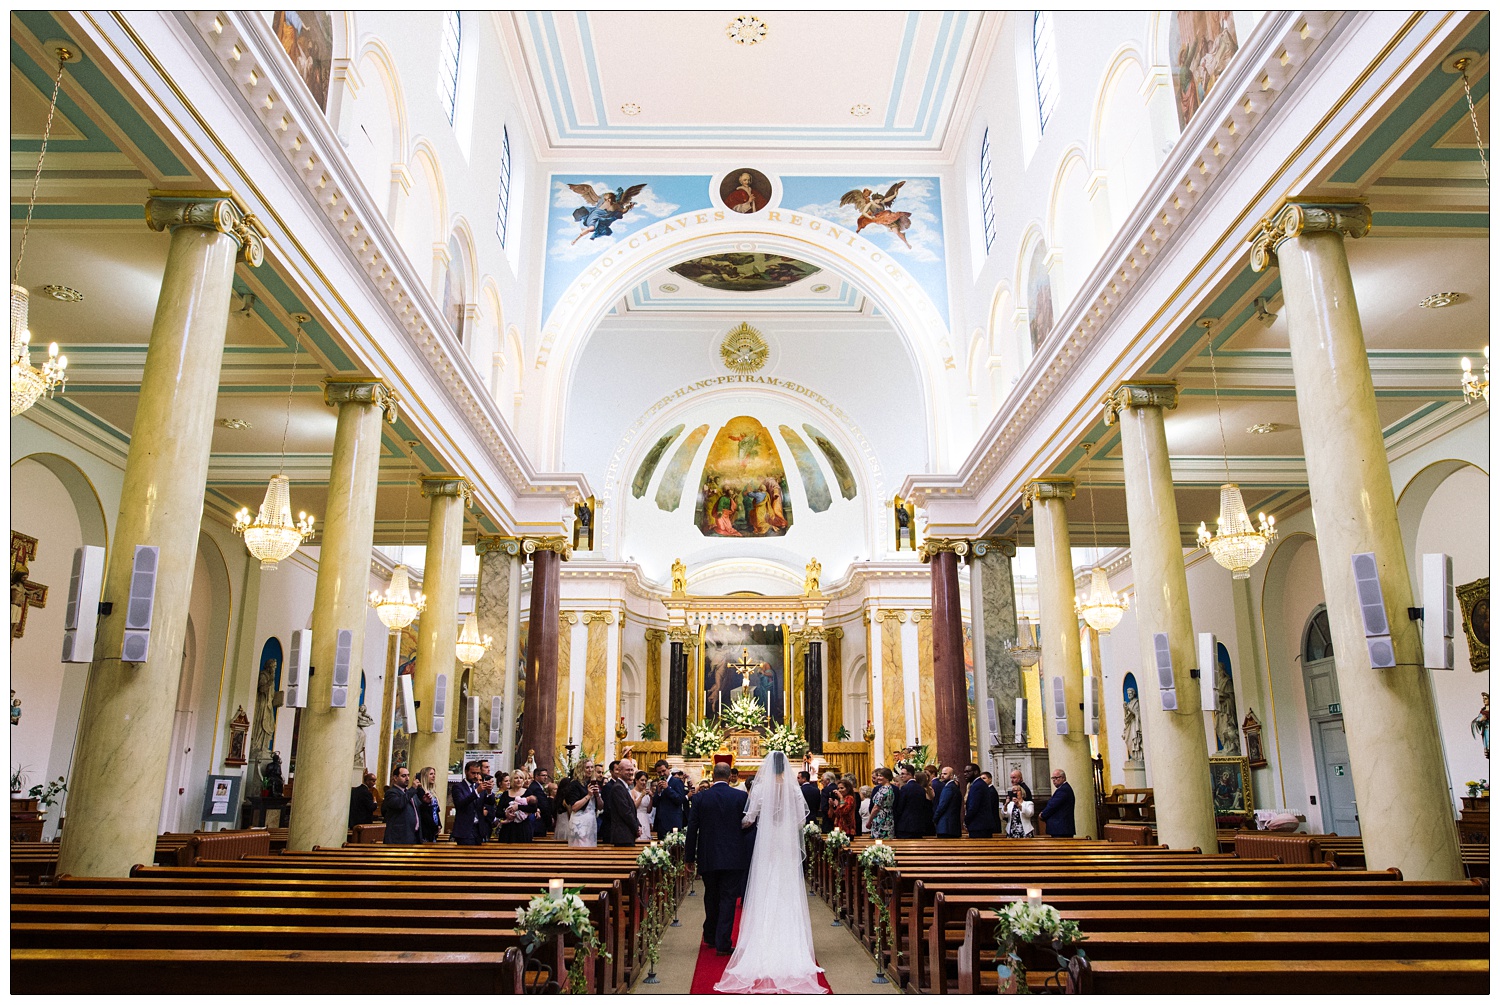 The bride being walking up the aisle with her father. The view from behind as the veil trails on the red carpet. St. Peter's Italian Church in Clerkenwell.